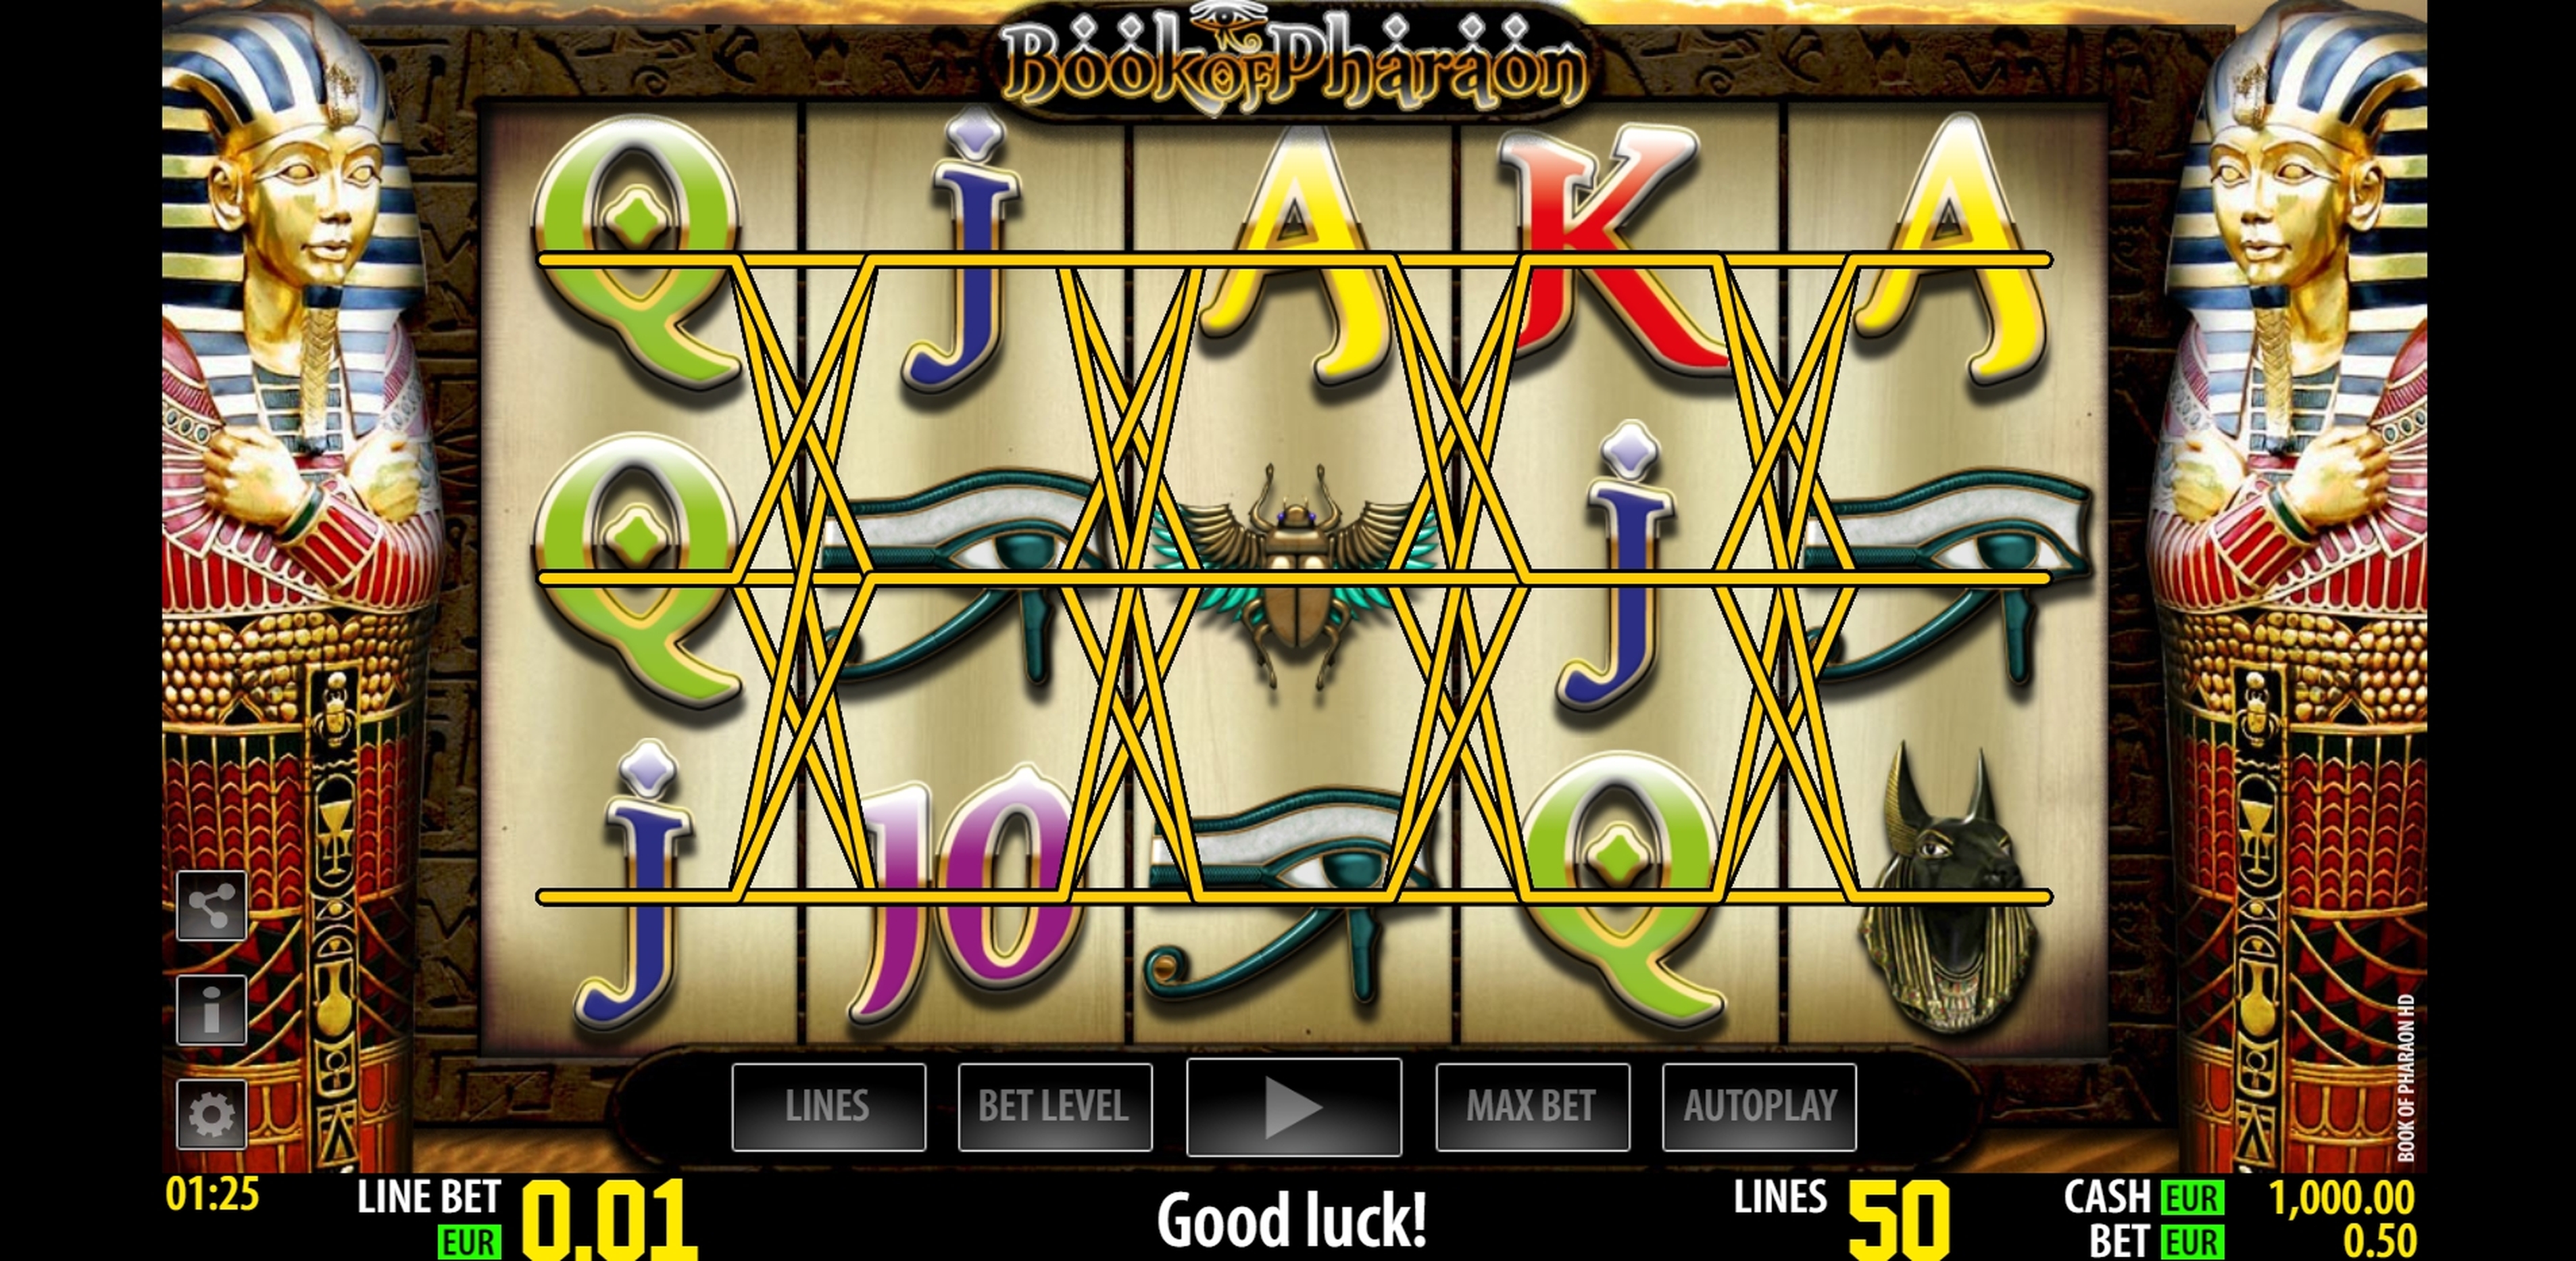 Reels in Book of Pharaon HD Slot Game by World Match